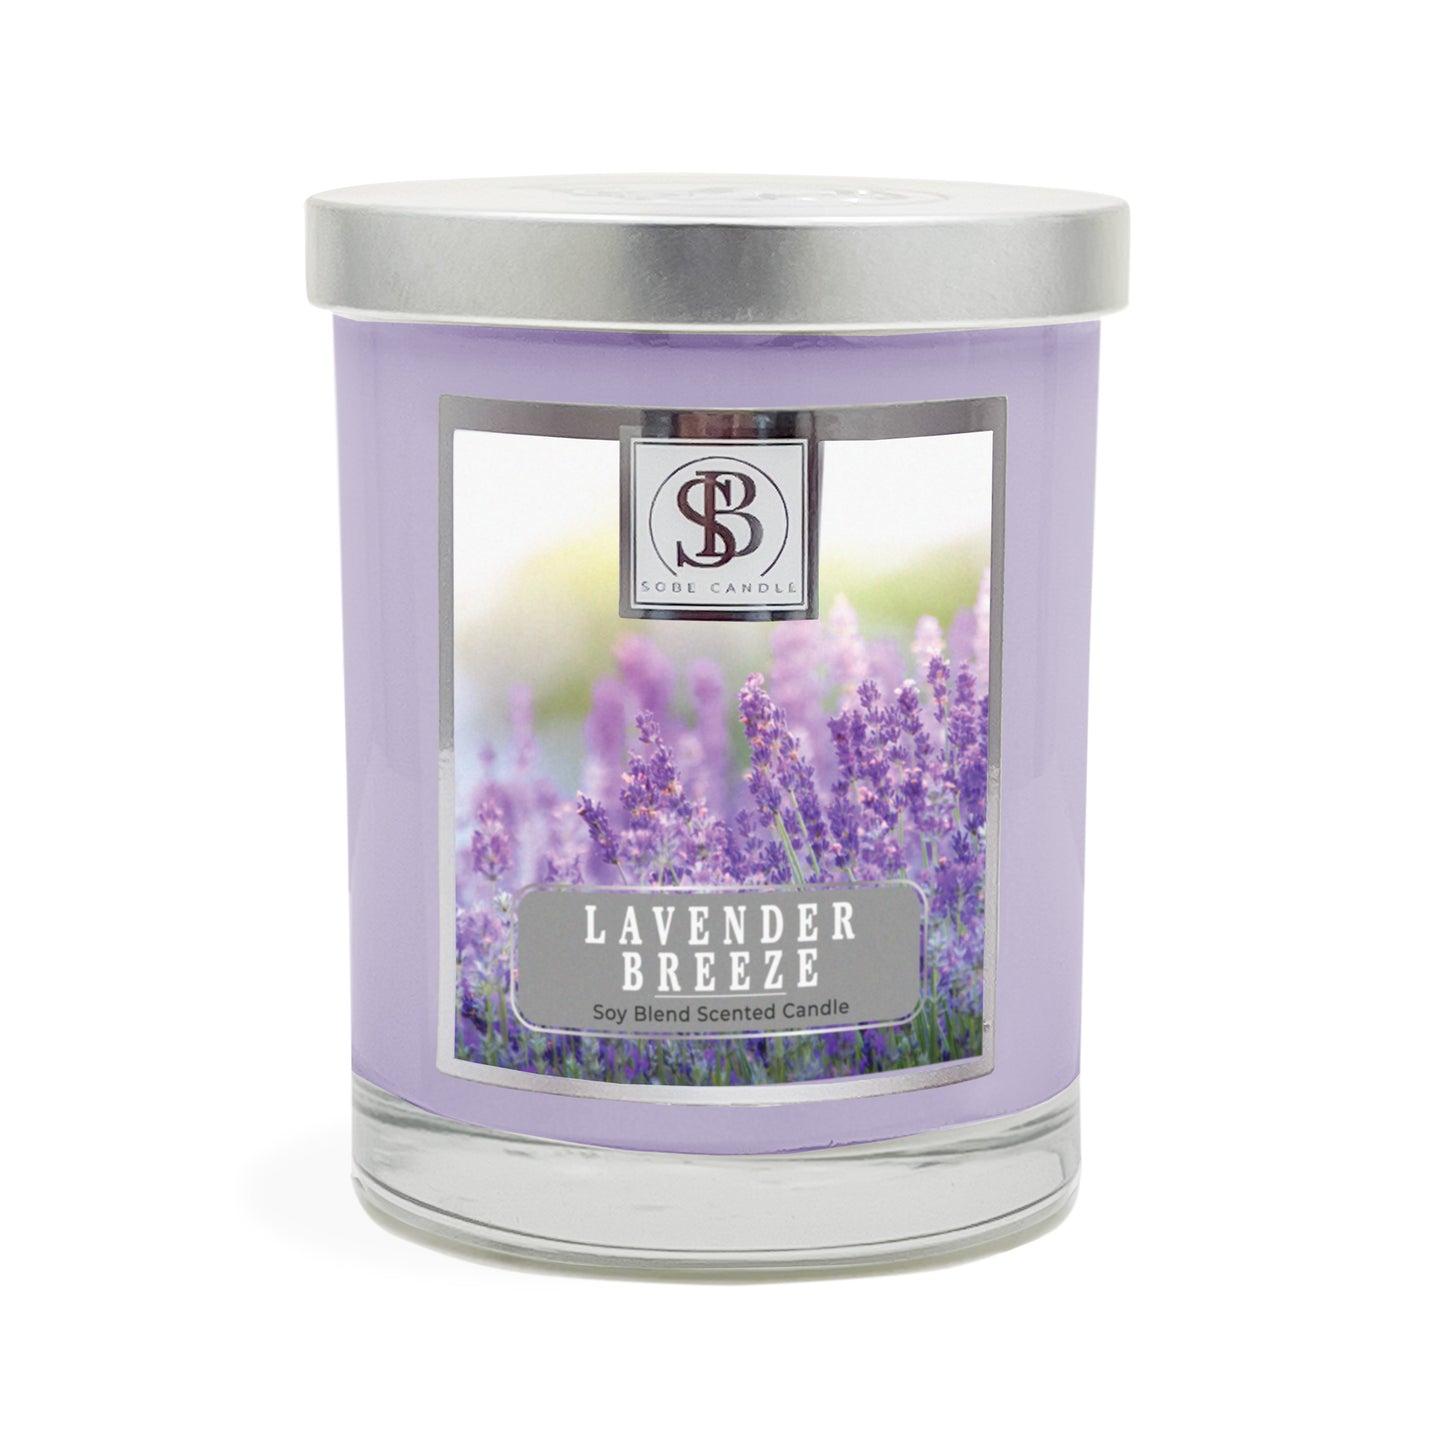 LAVENDER BREEZE | Soy Scented Candle 11 oz